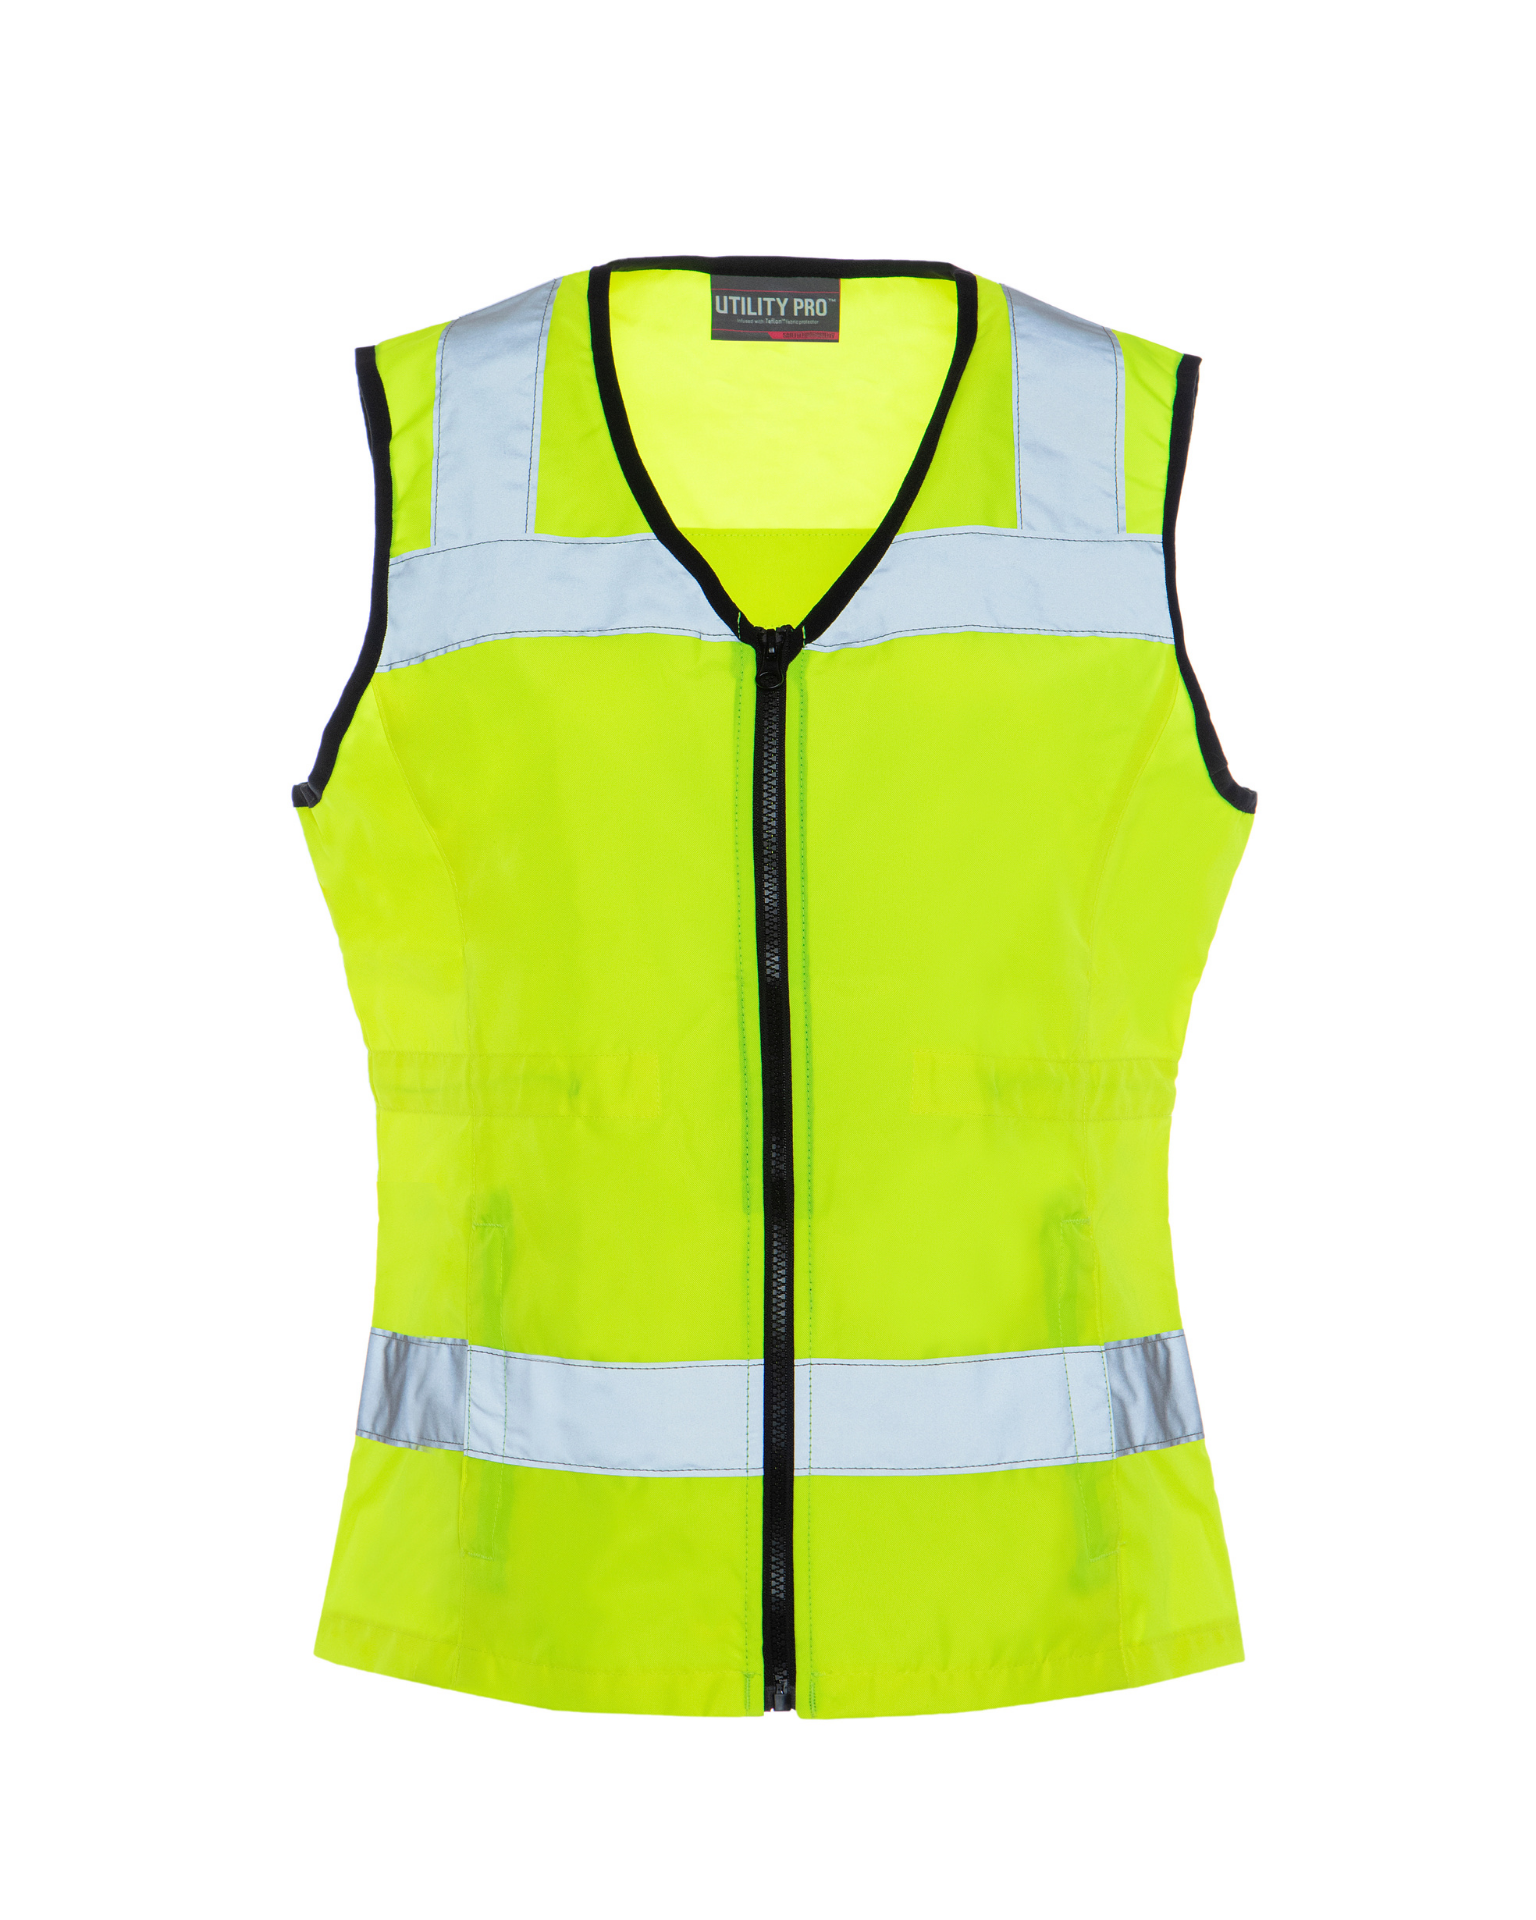 ANSI Class 2 High Visibility Women's ergonomic water repellent nylon safety vest by Utility Pro